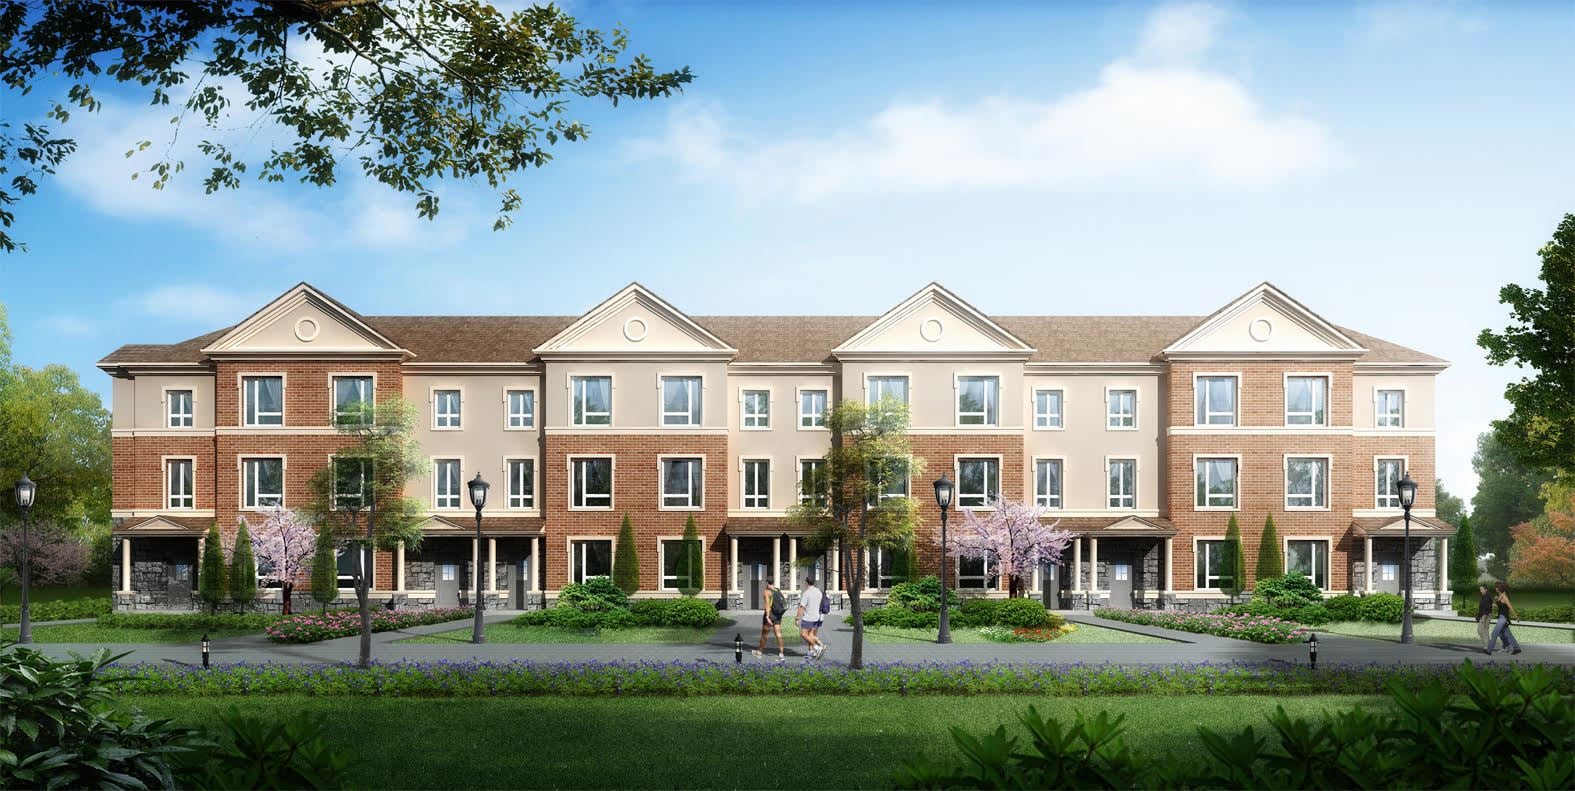 Rendering of Markham GOLD towns exterior